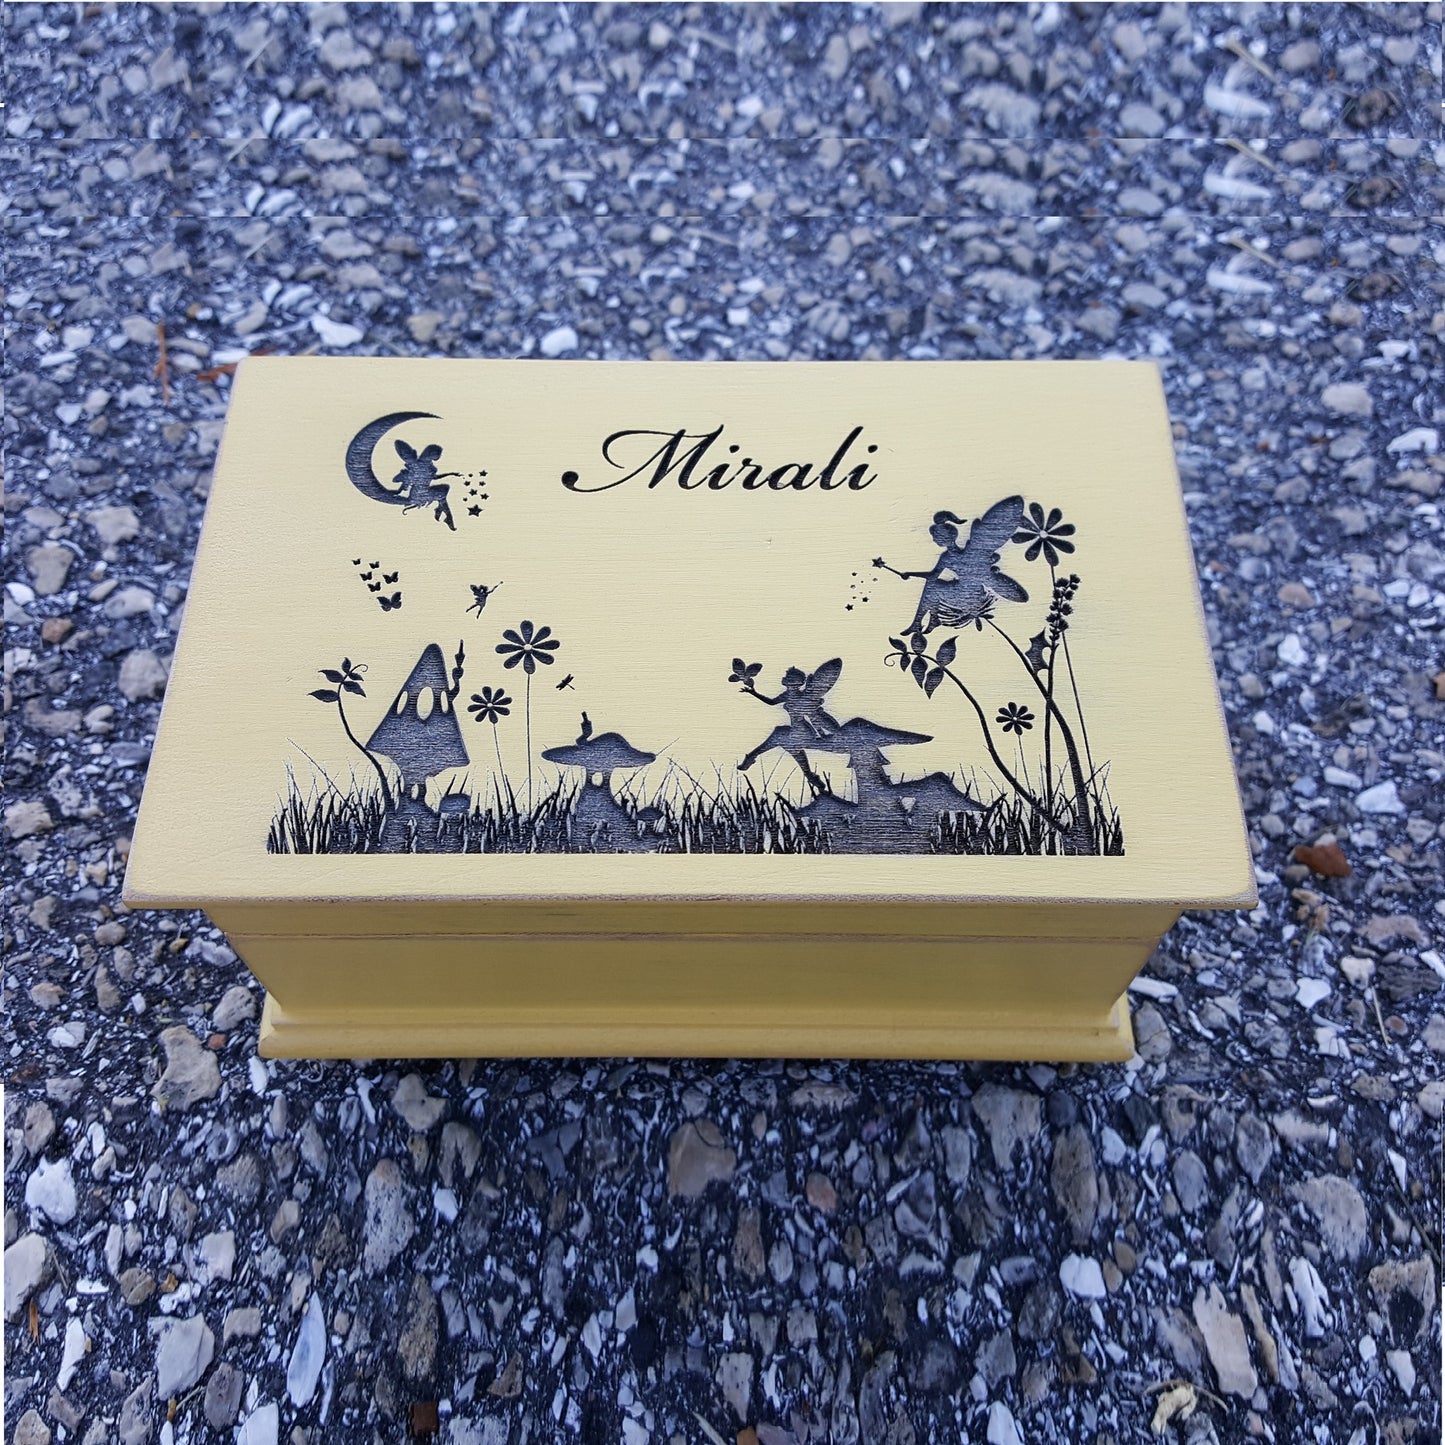 Fairy garden engraved jewelry box with name on top with built in music player